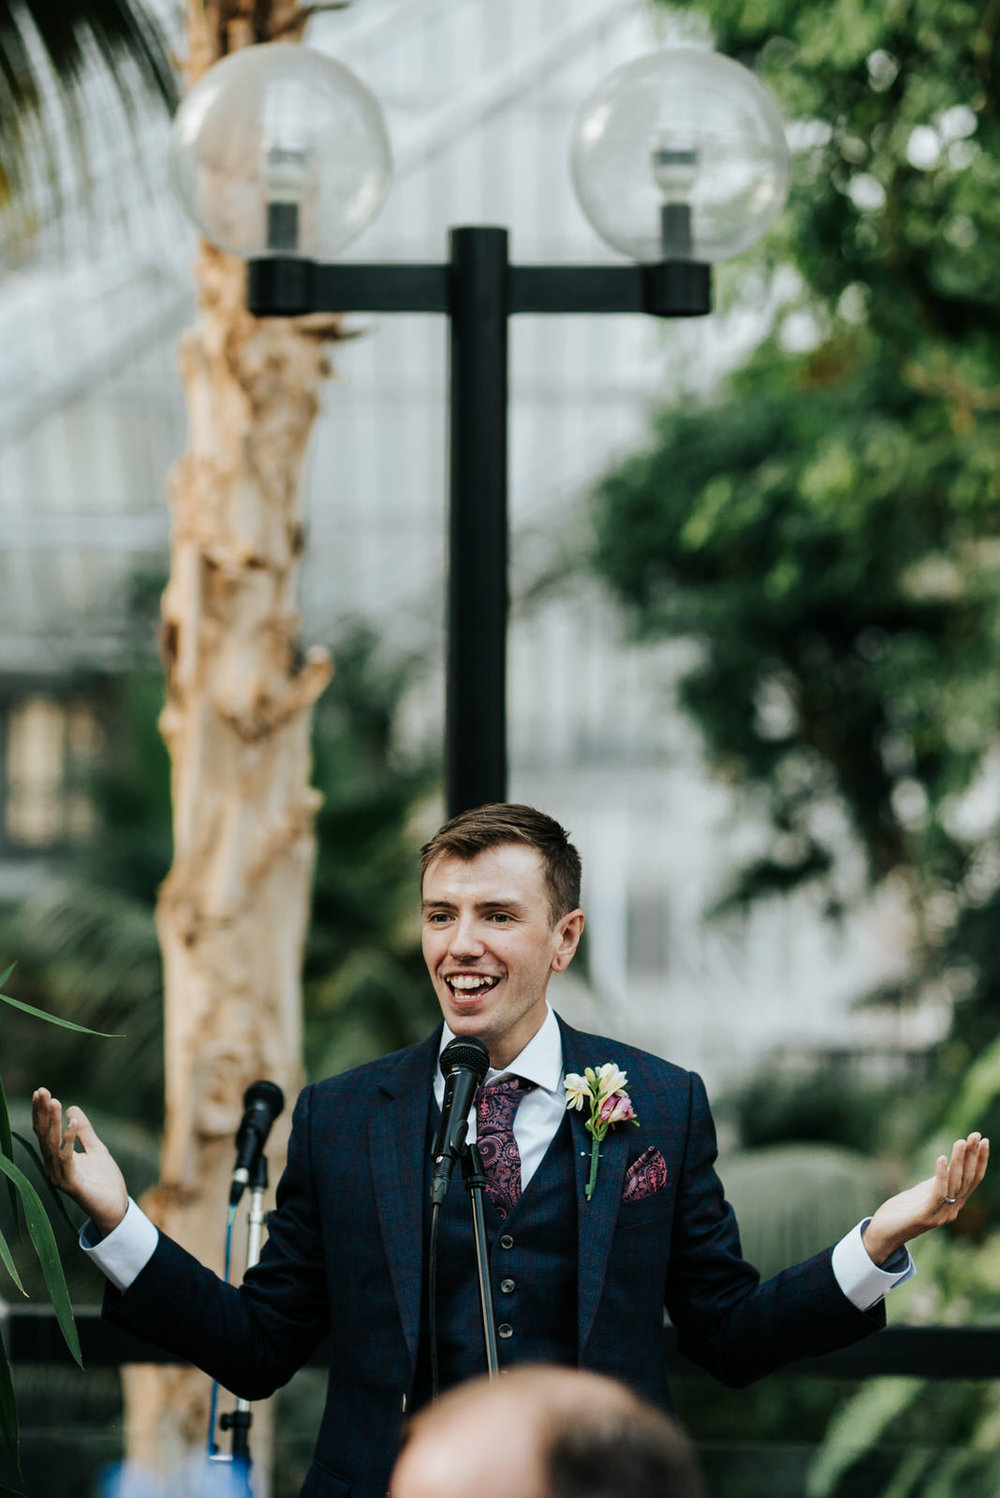 Groom looks happy and amused as he starts delivering his wedding